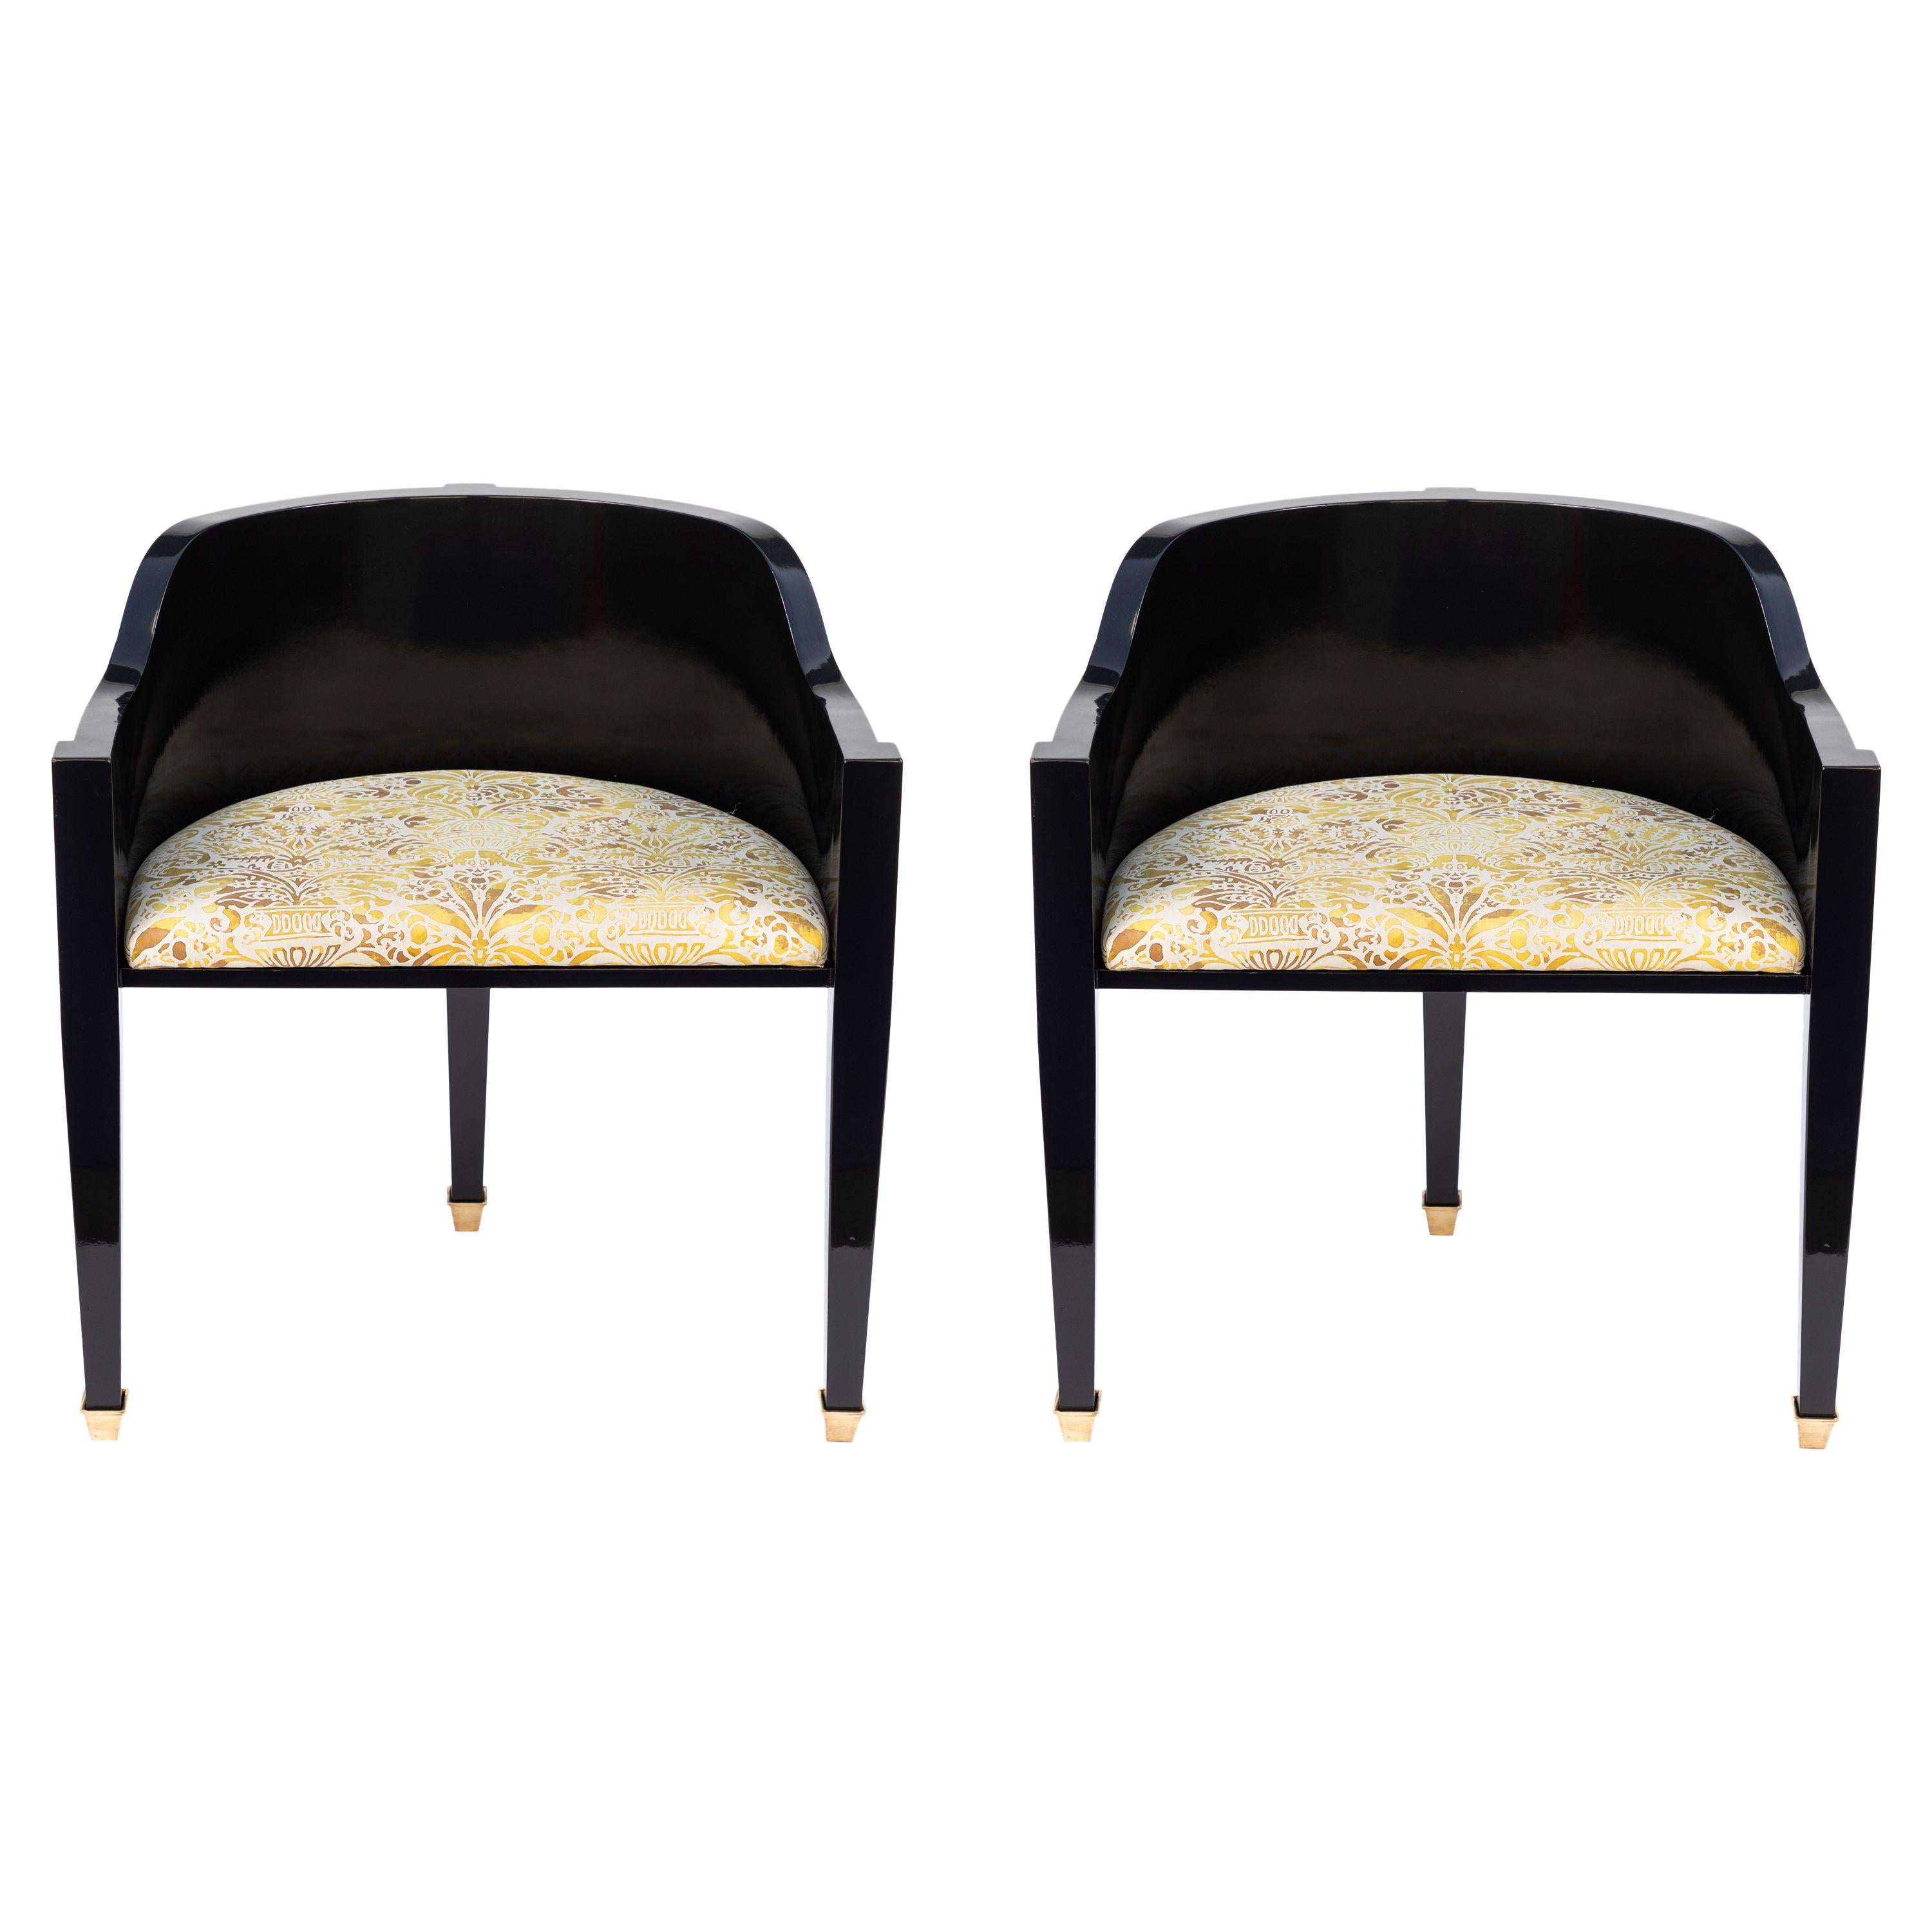 Pair of Midcentury Hollywood Regency Style Chairs